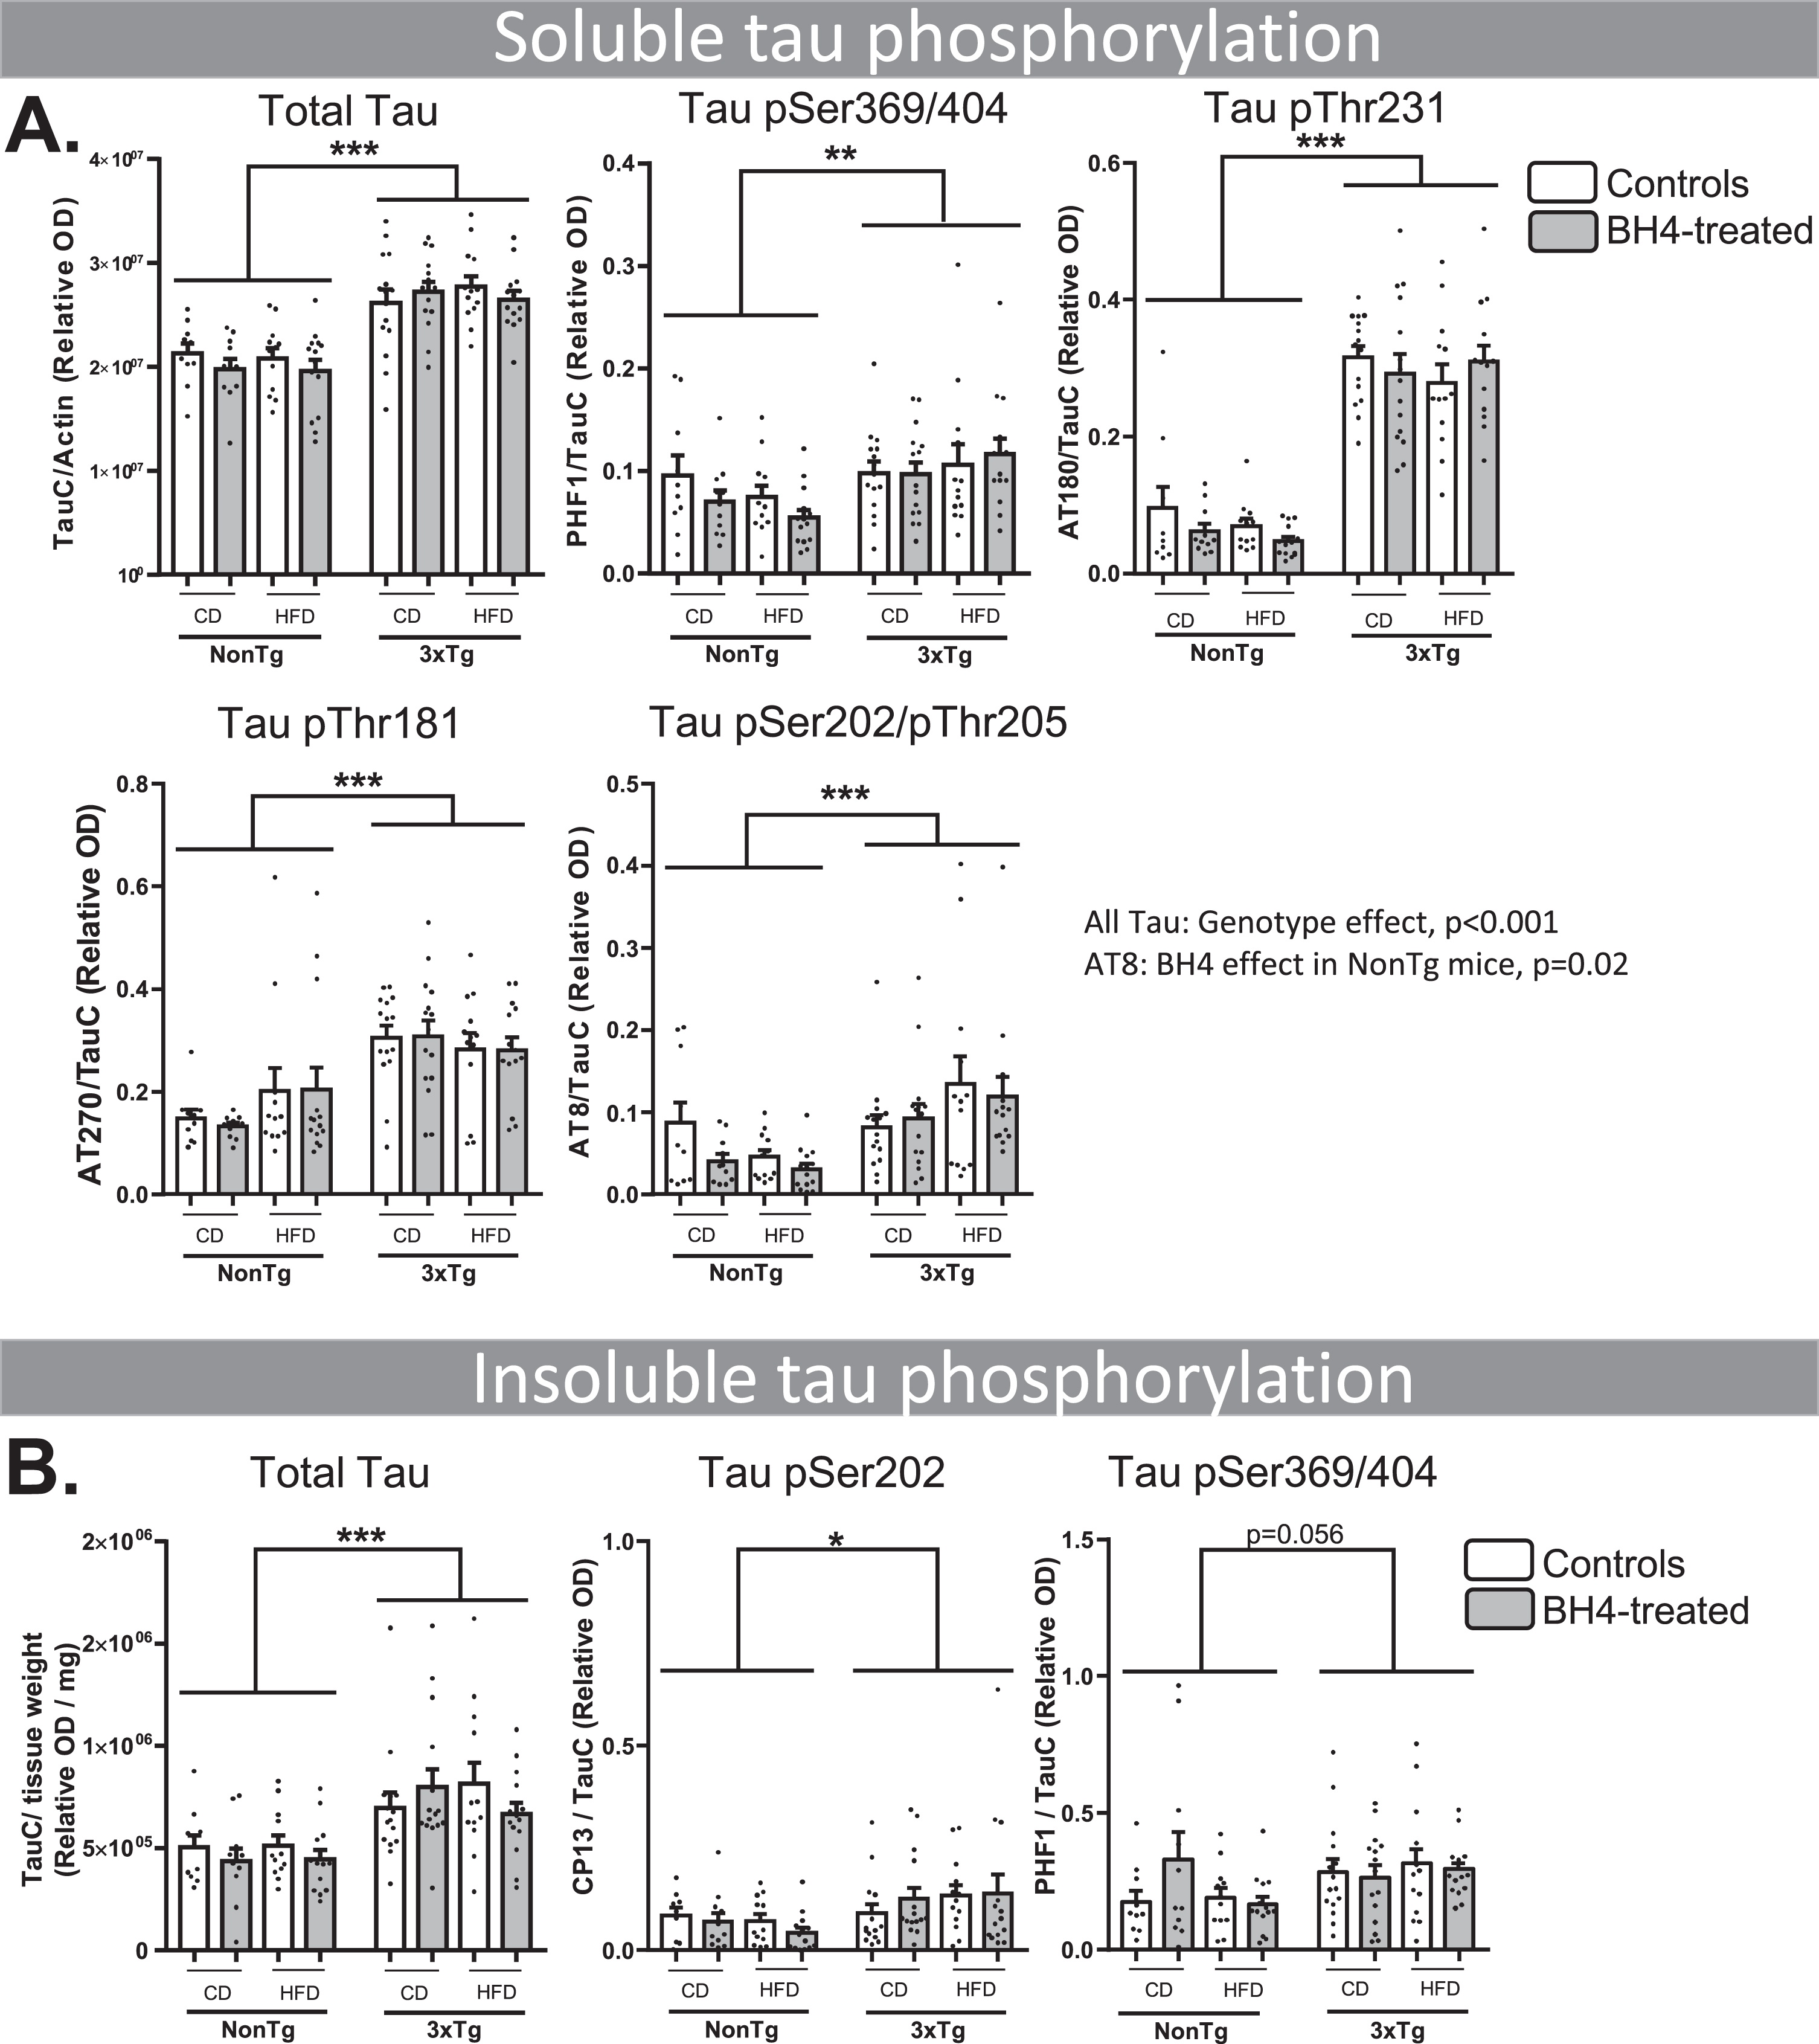 BH4 administration does not affect tau pathology. Hippocampal soluble (A) and insoluble (B) tau phosphorylation evaluated by western immunoblotting, confirming higher levels in 3xTg-AD compared to NonTg mice. Values are expressed as mean±SEM with N = 10–15/group. Statistical analyses: *p < 0.05, **p < 0.01, ***p < 0.001, Genotype effect (Multimodal ANOVA).